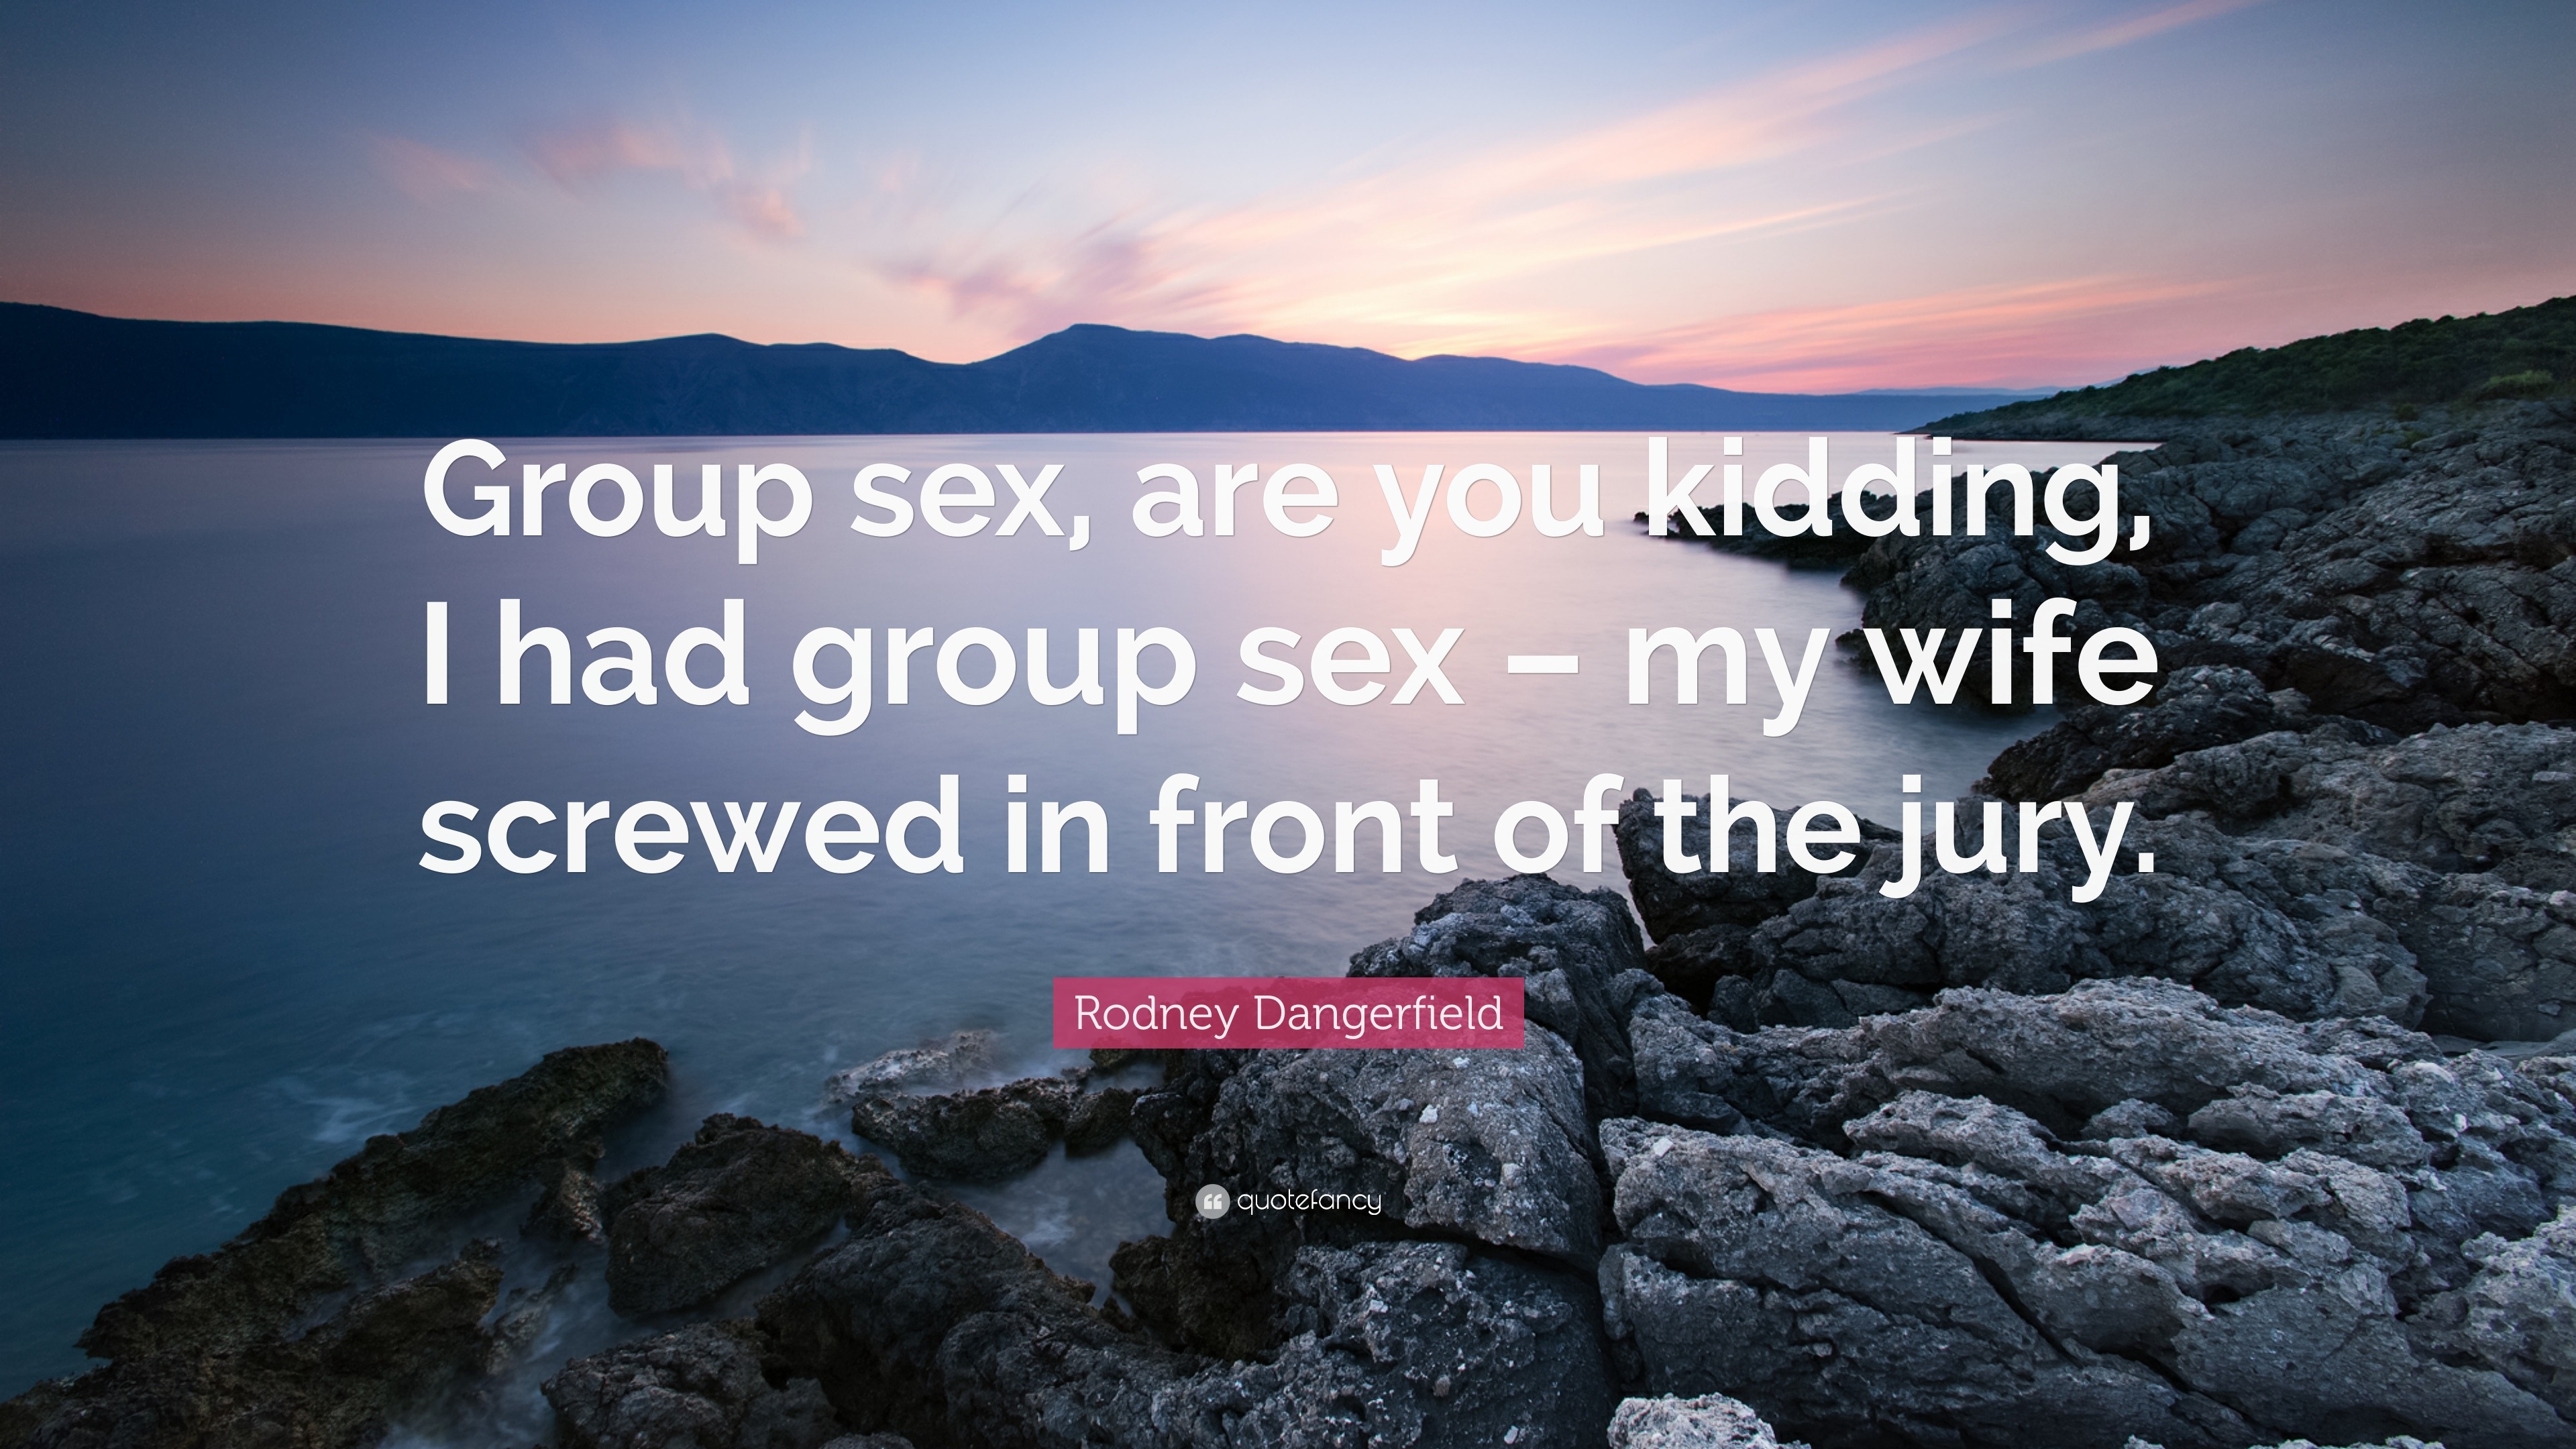 Rodney Dangerfield Quote “Group sex, are you kidding, I had group pic